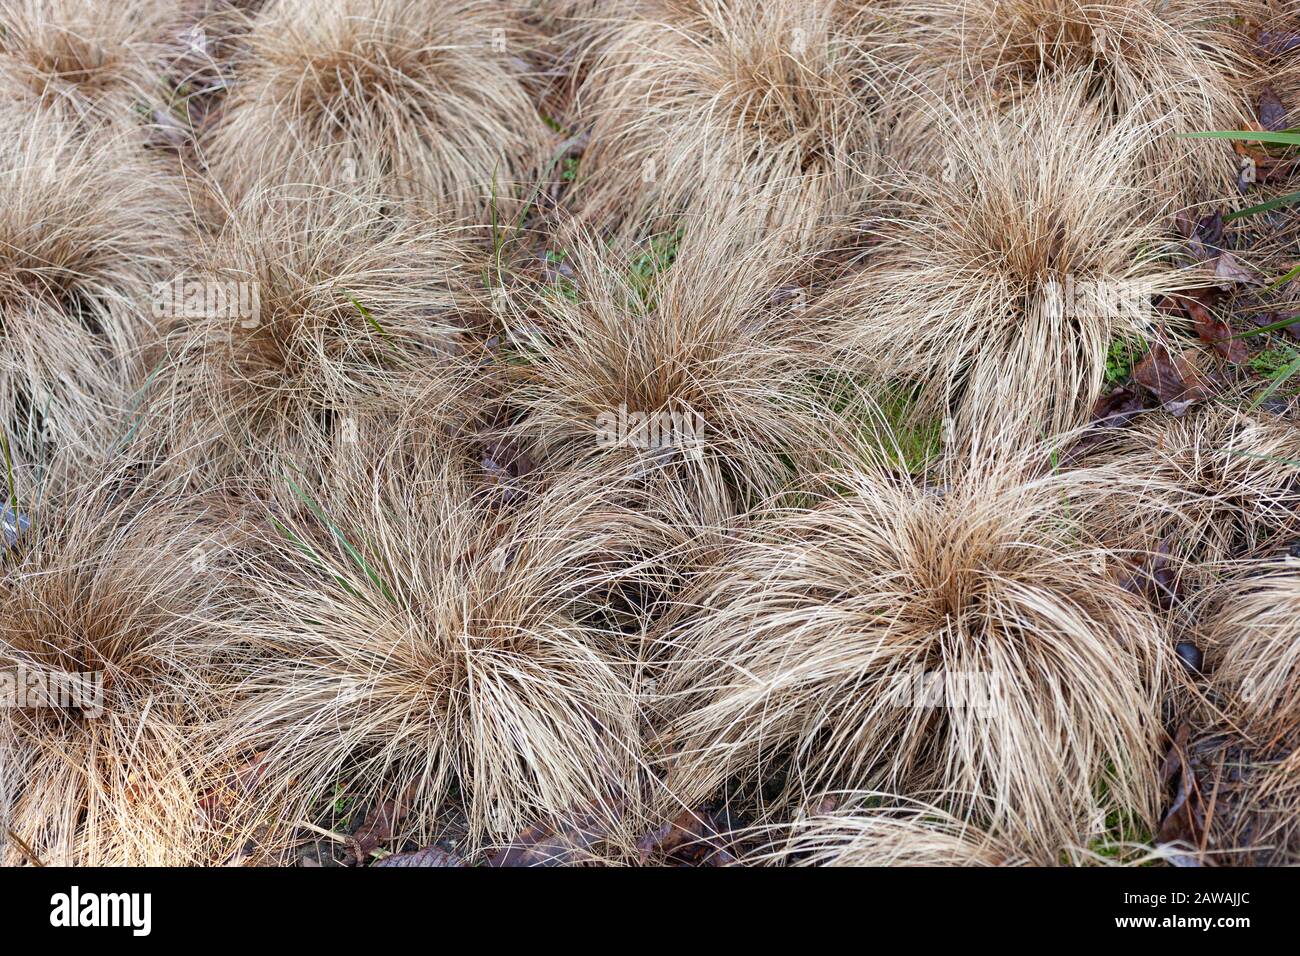 Red-leaved Carex Comans ( Red-leaved New Zealand hair sedge) growing in dense tufts in an English garden. Stock Photo